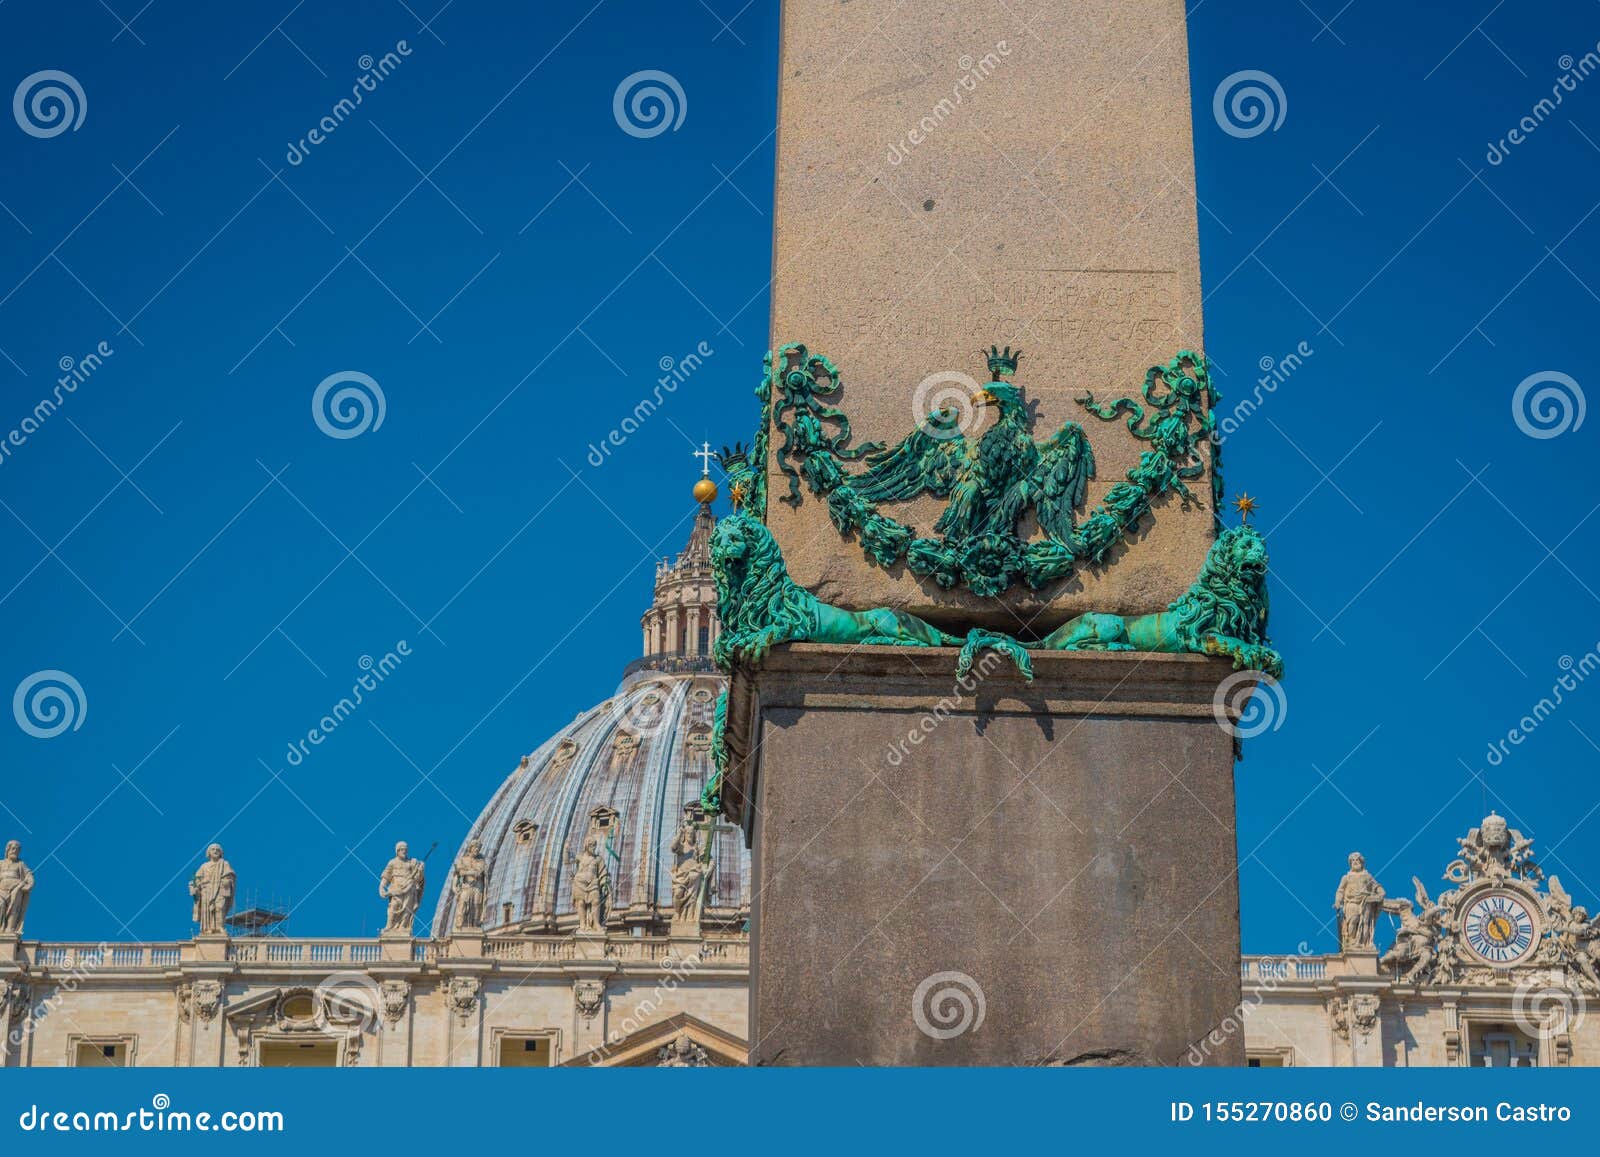 detail of bronze lions holding the egyptian obelisk and the basilica of st. peter in the background in the vatican